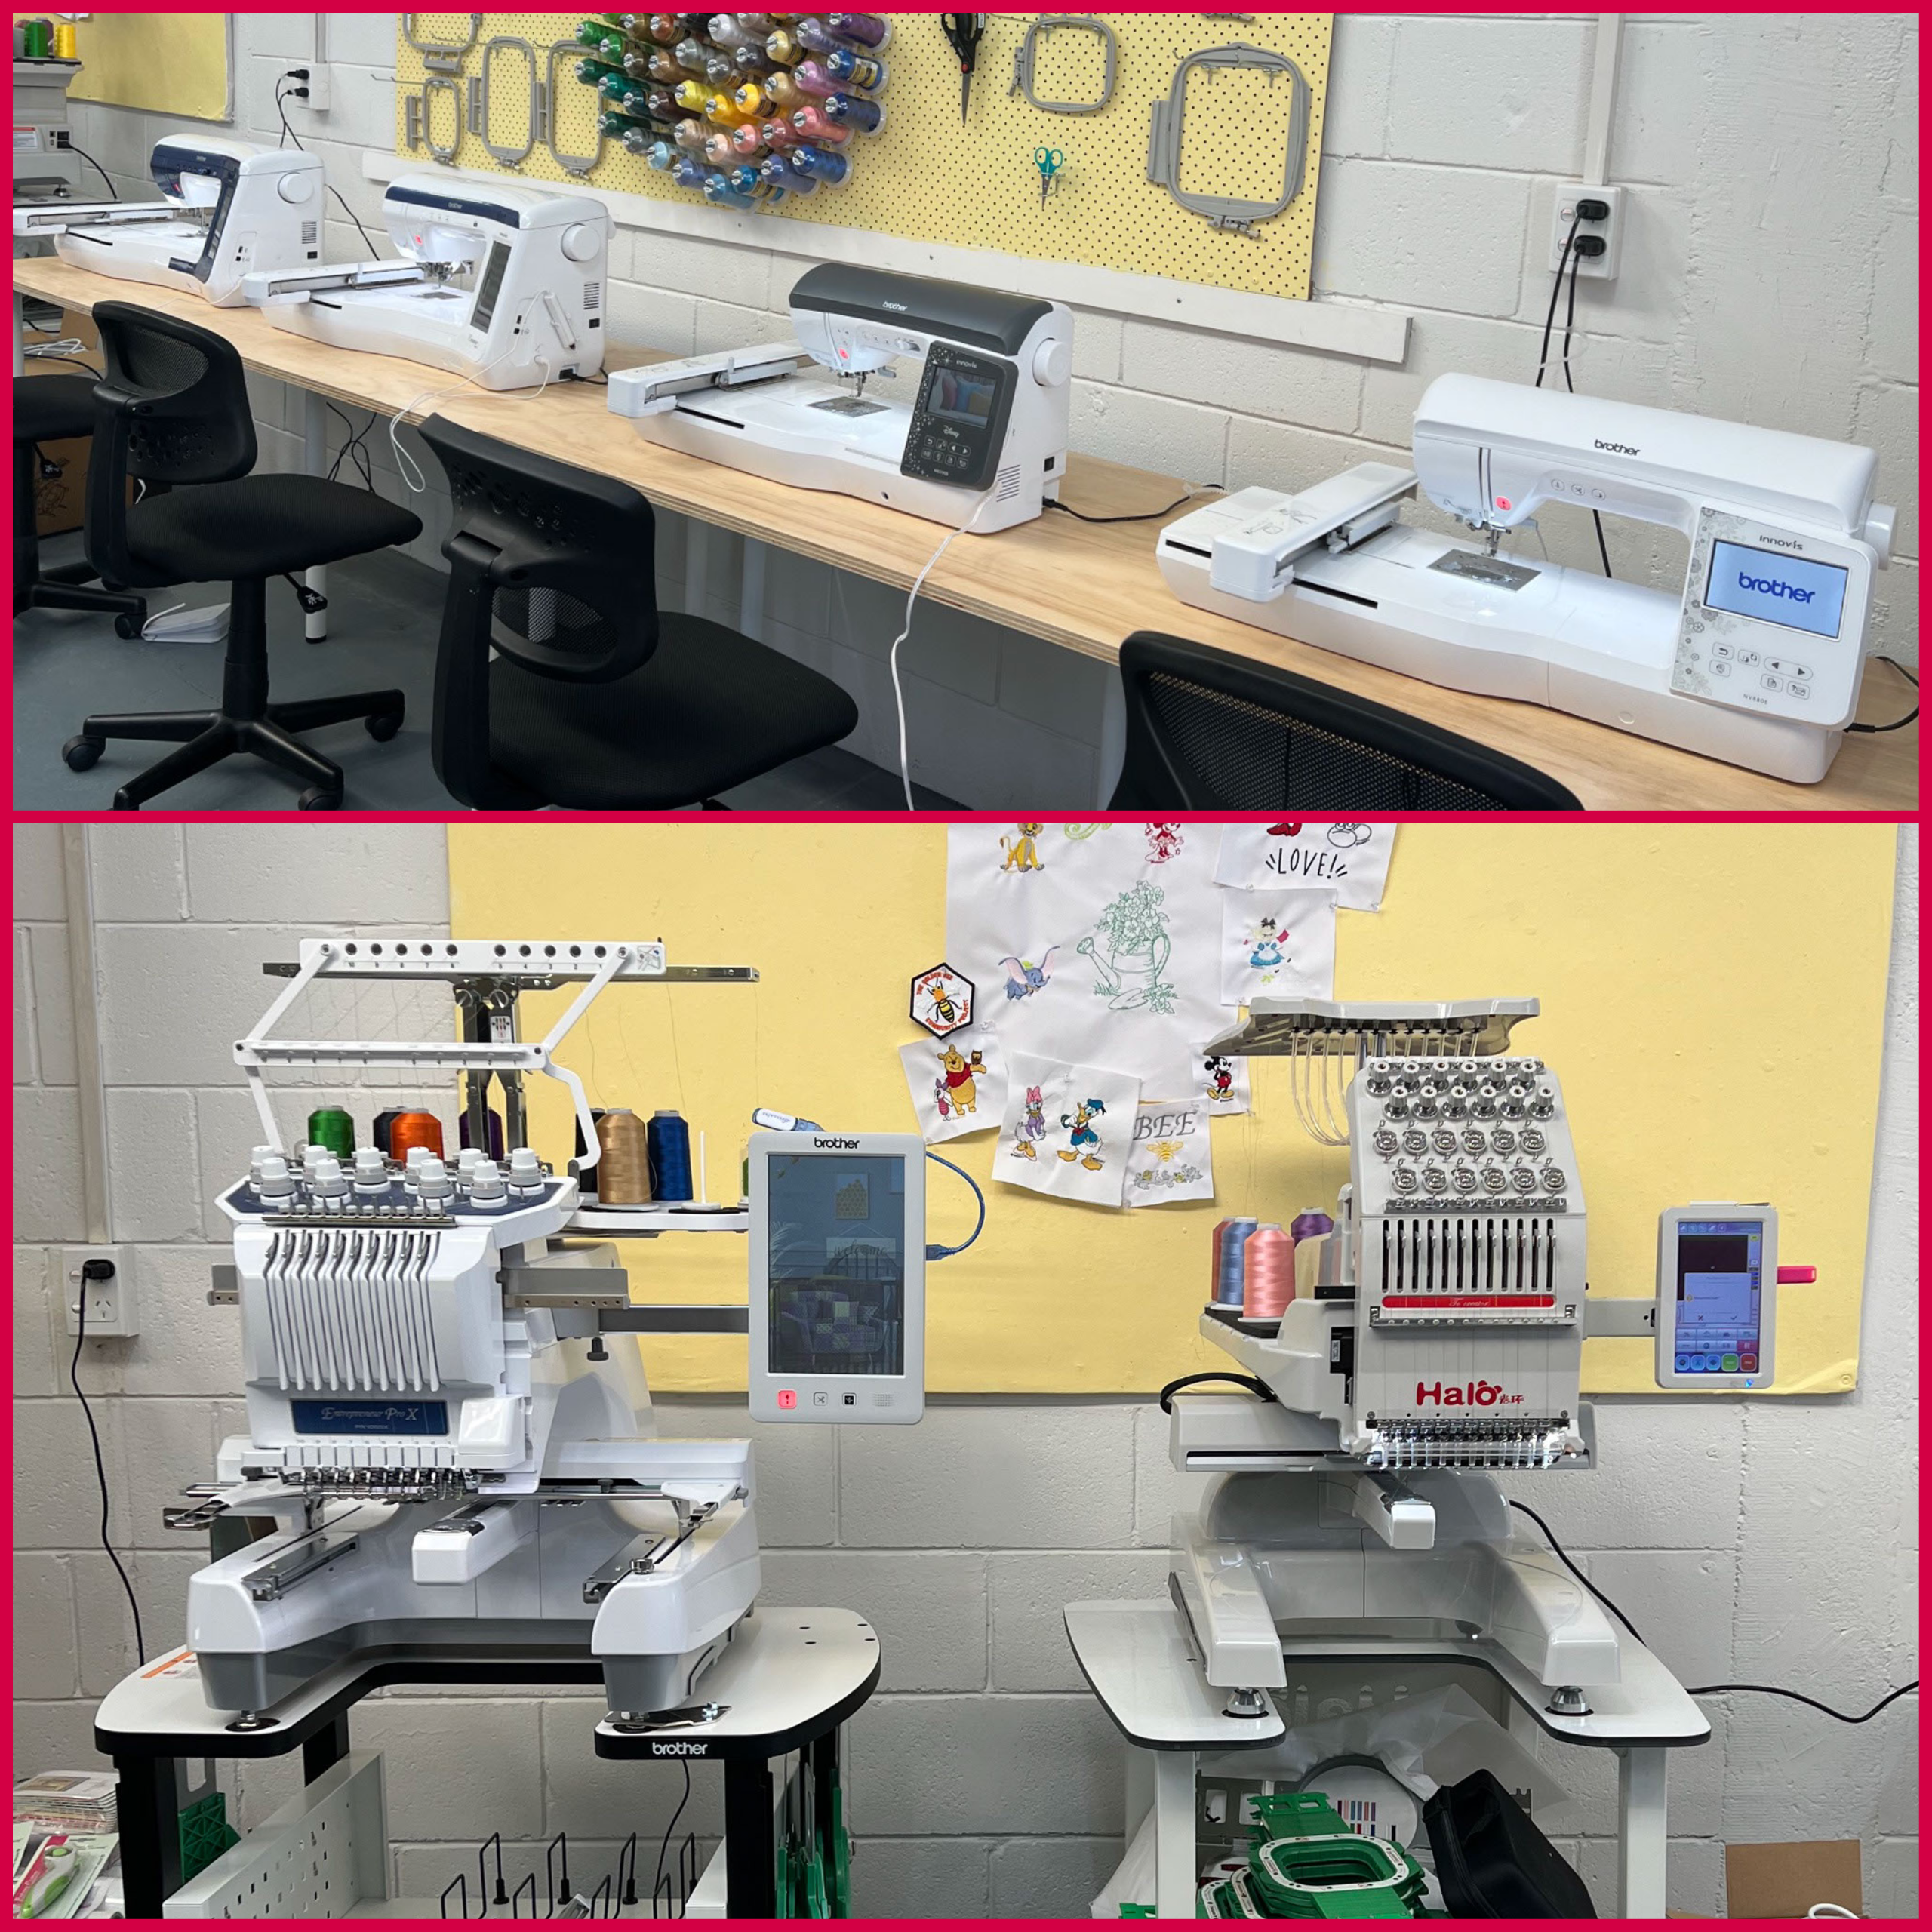 sewing machines, embroidery machines and multineedle embroidery machines on display